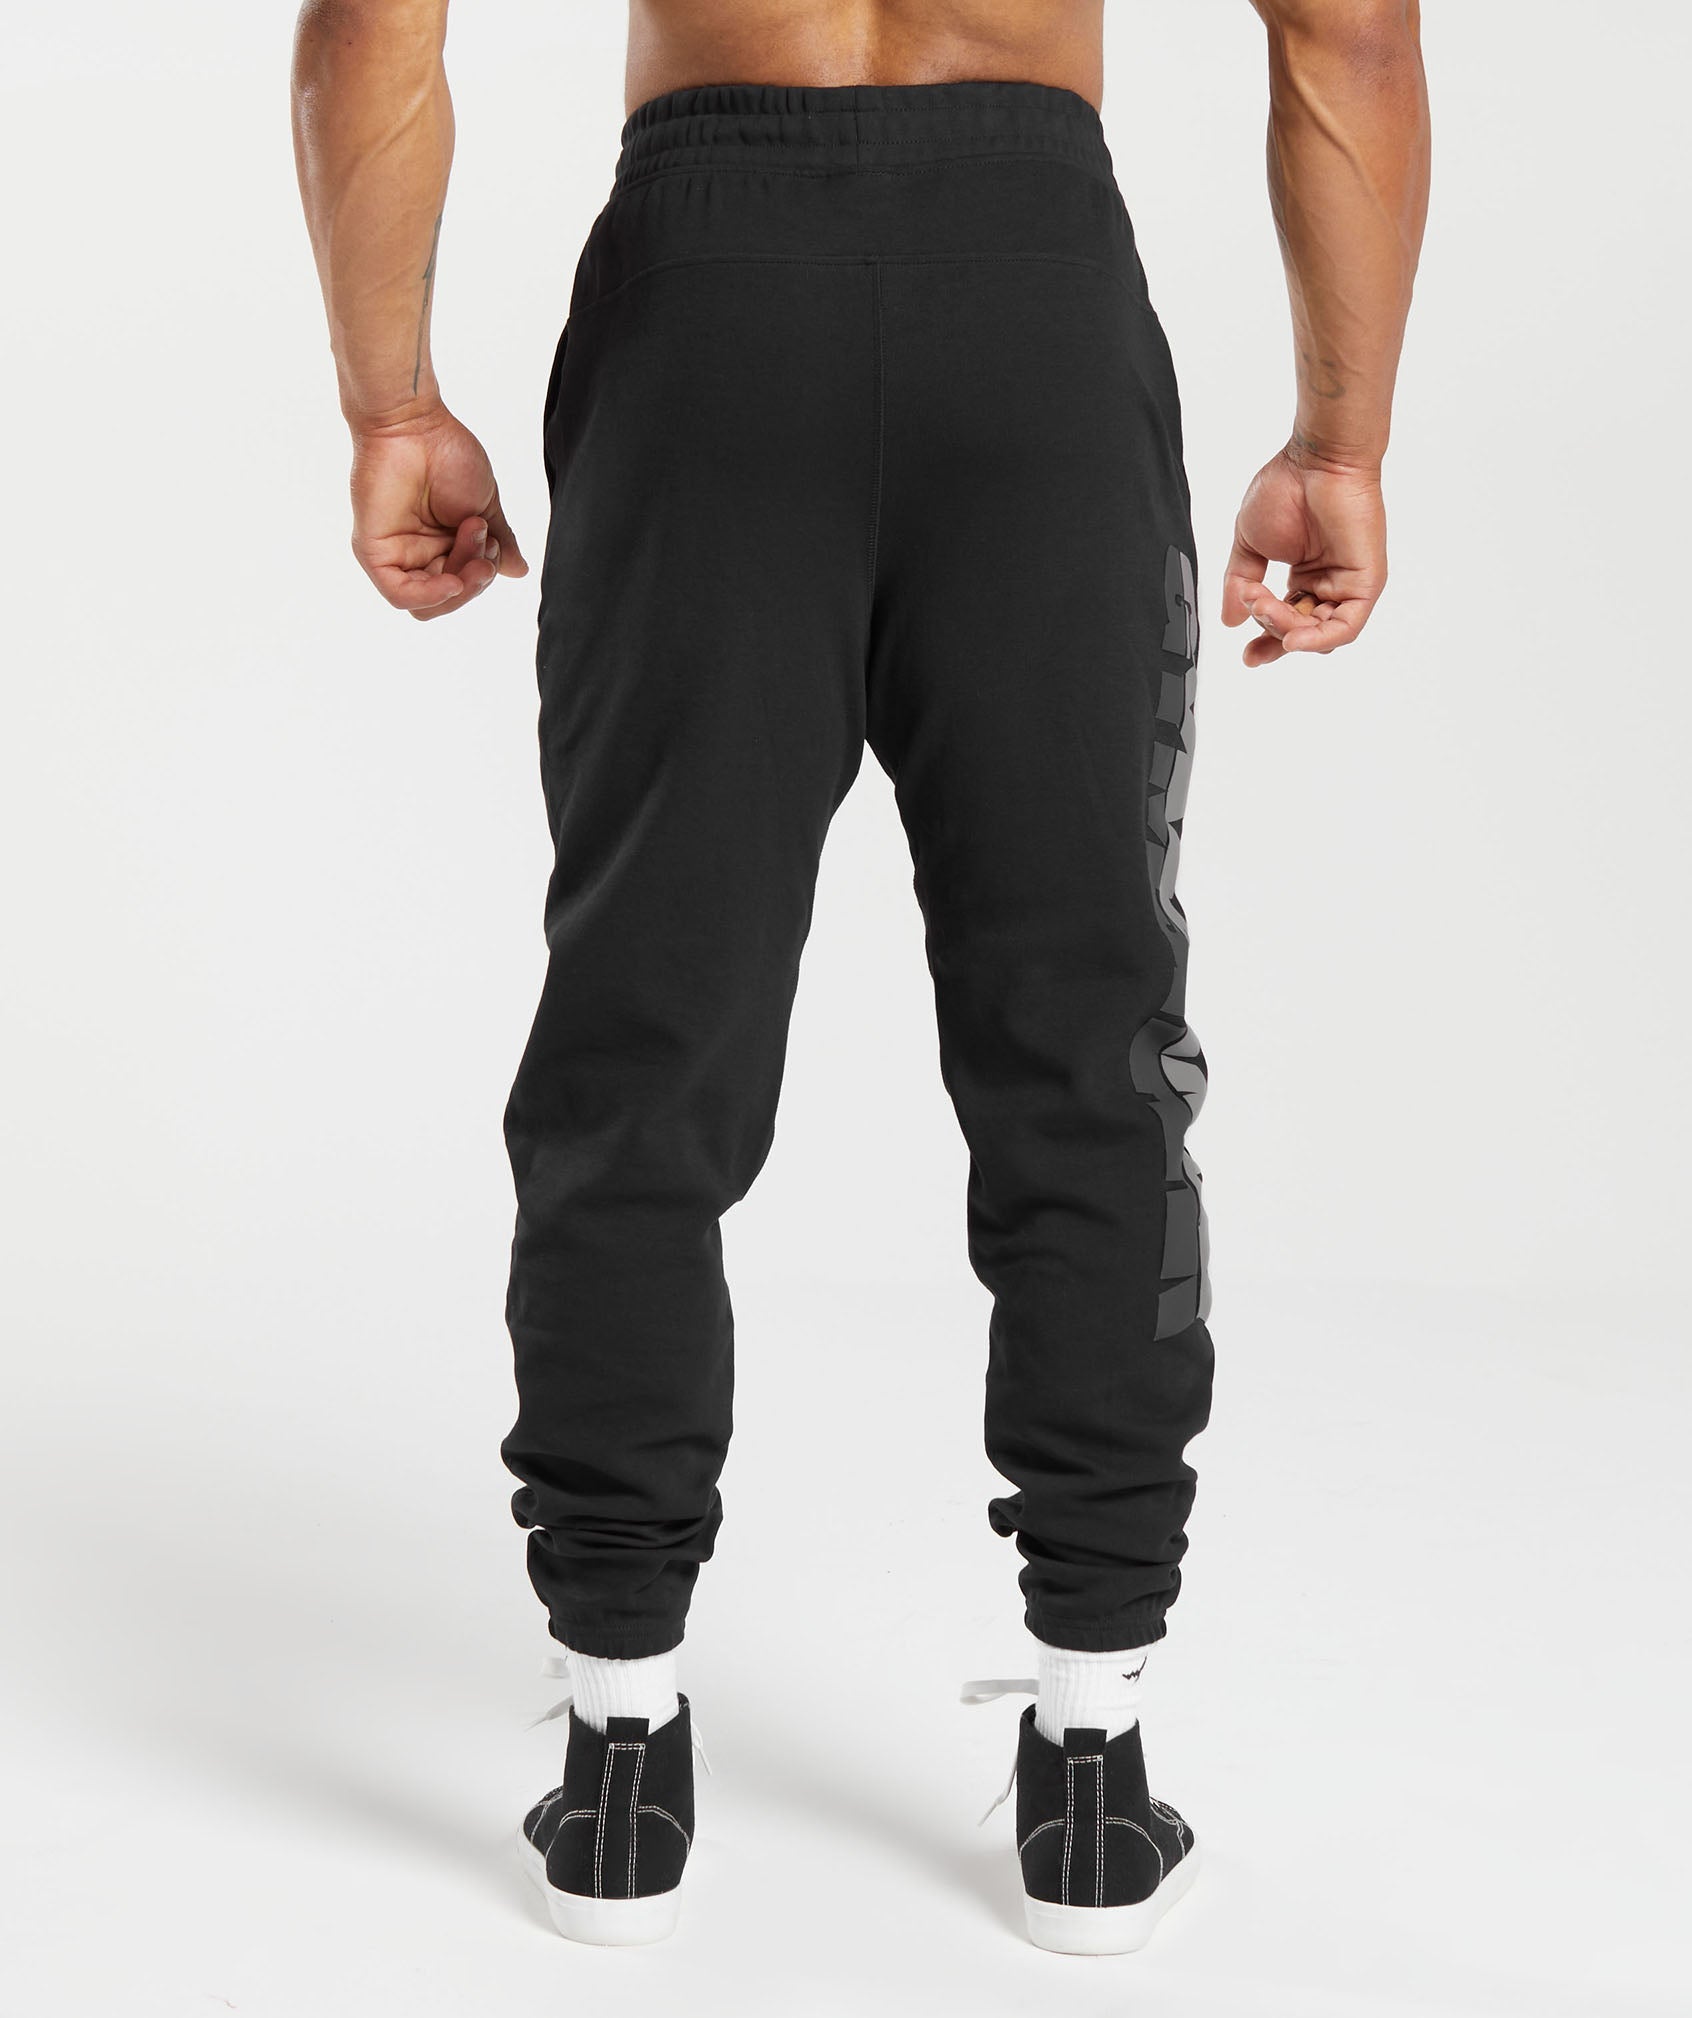 Bold Joggers in Black - view 7